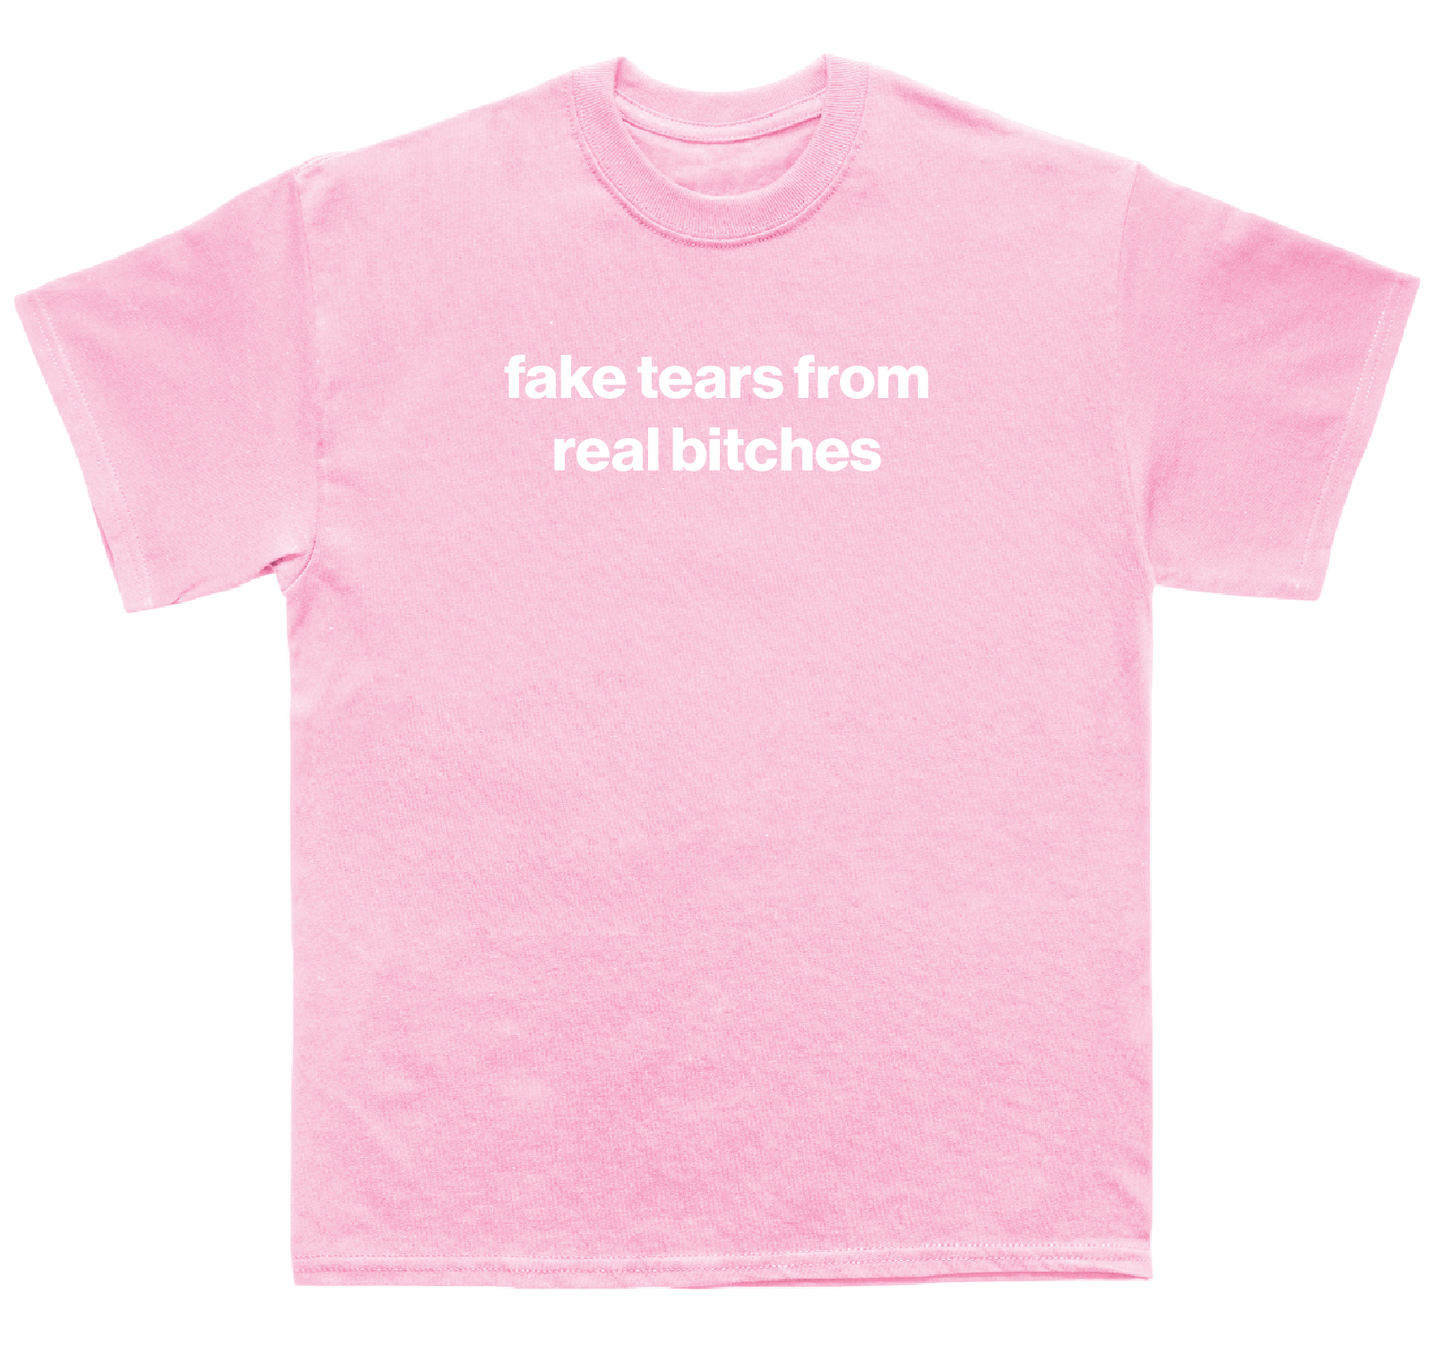 fake tears from real bitches shirt